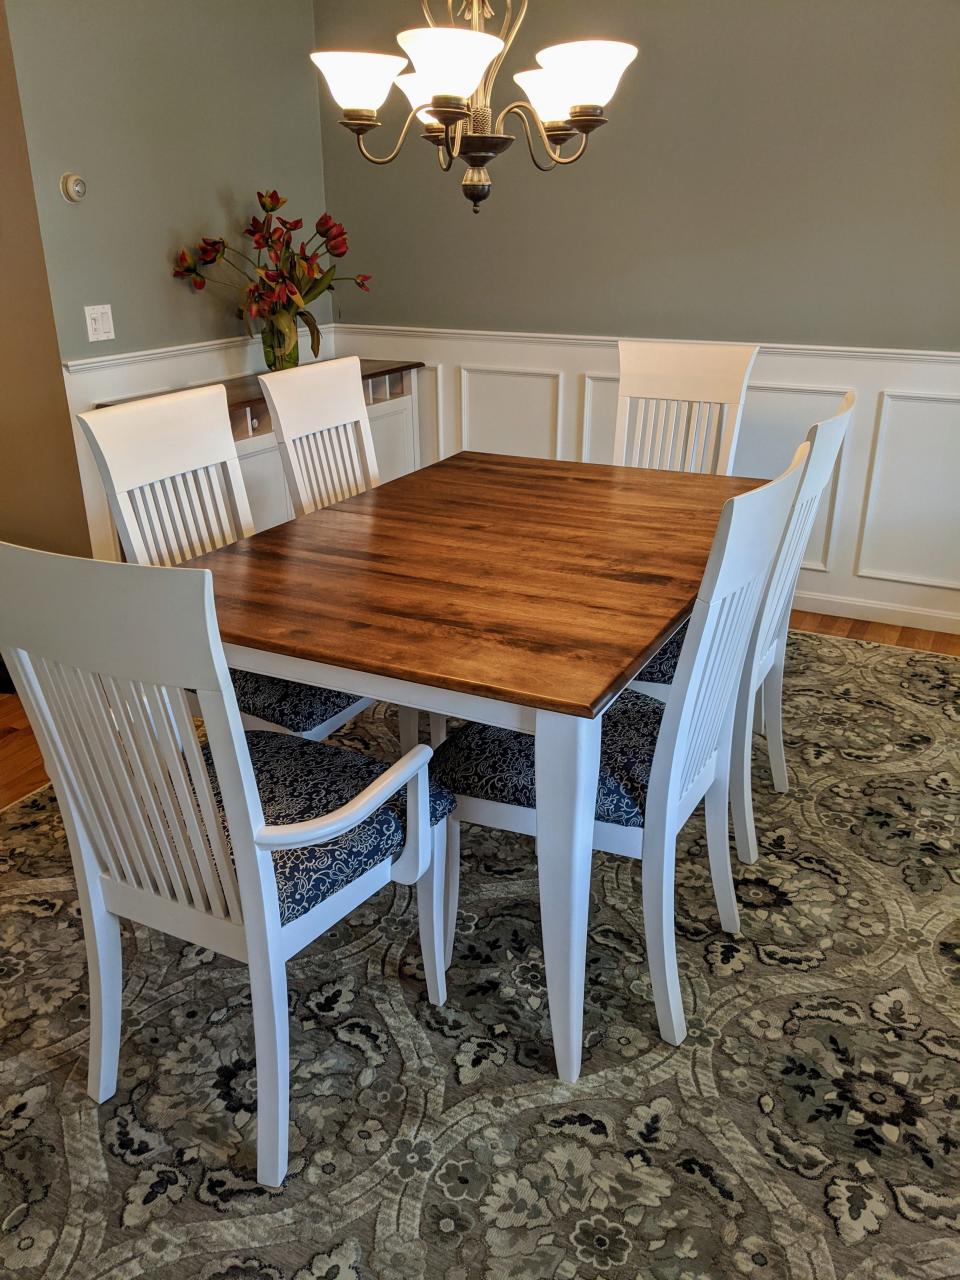 A refinished dining room set by Berkley residents Kim and Dan Arena, owners of Bostonian Repurposed.